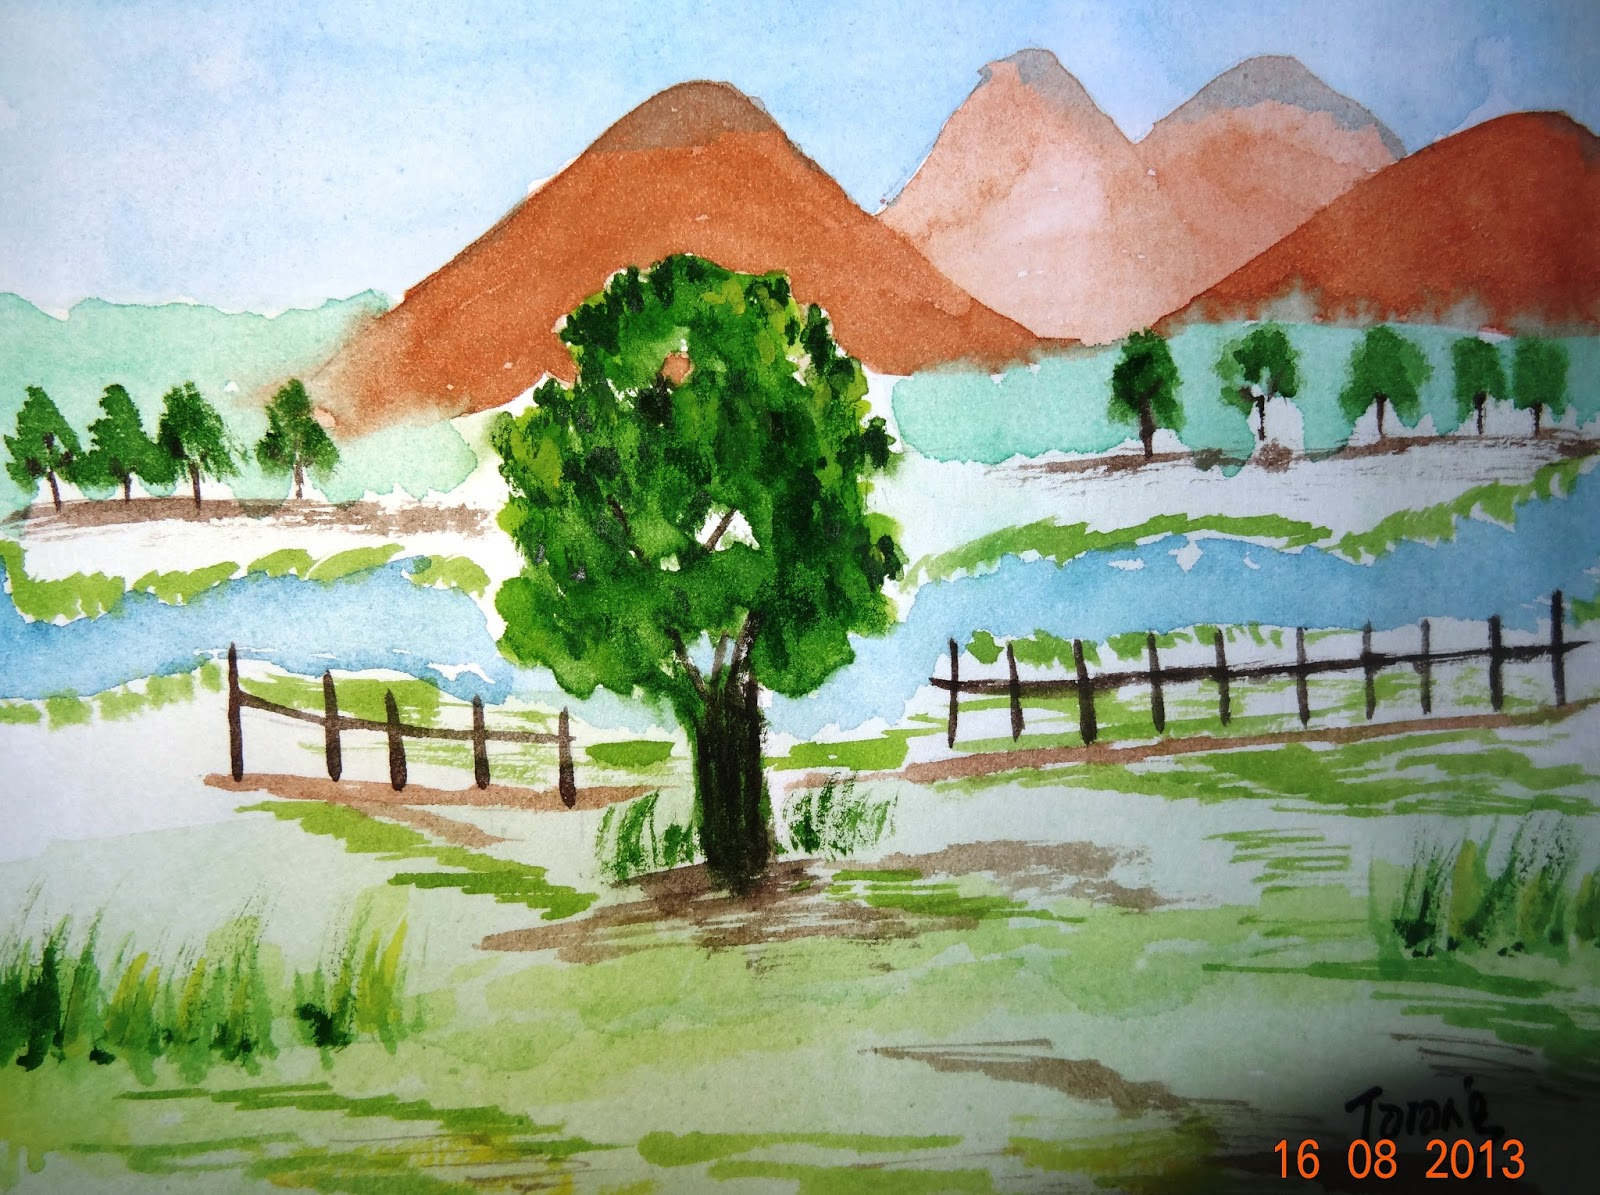 Drawing Pictures Of Nature With Colour at PaintingValley.com | Explore